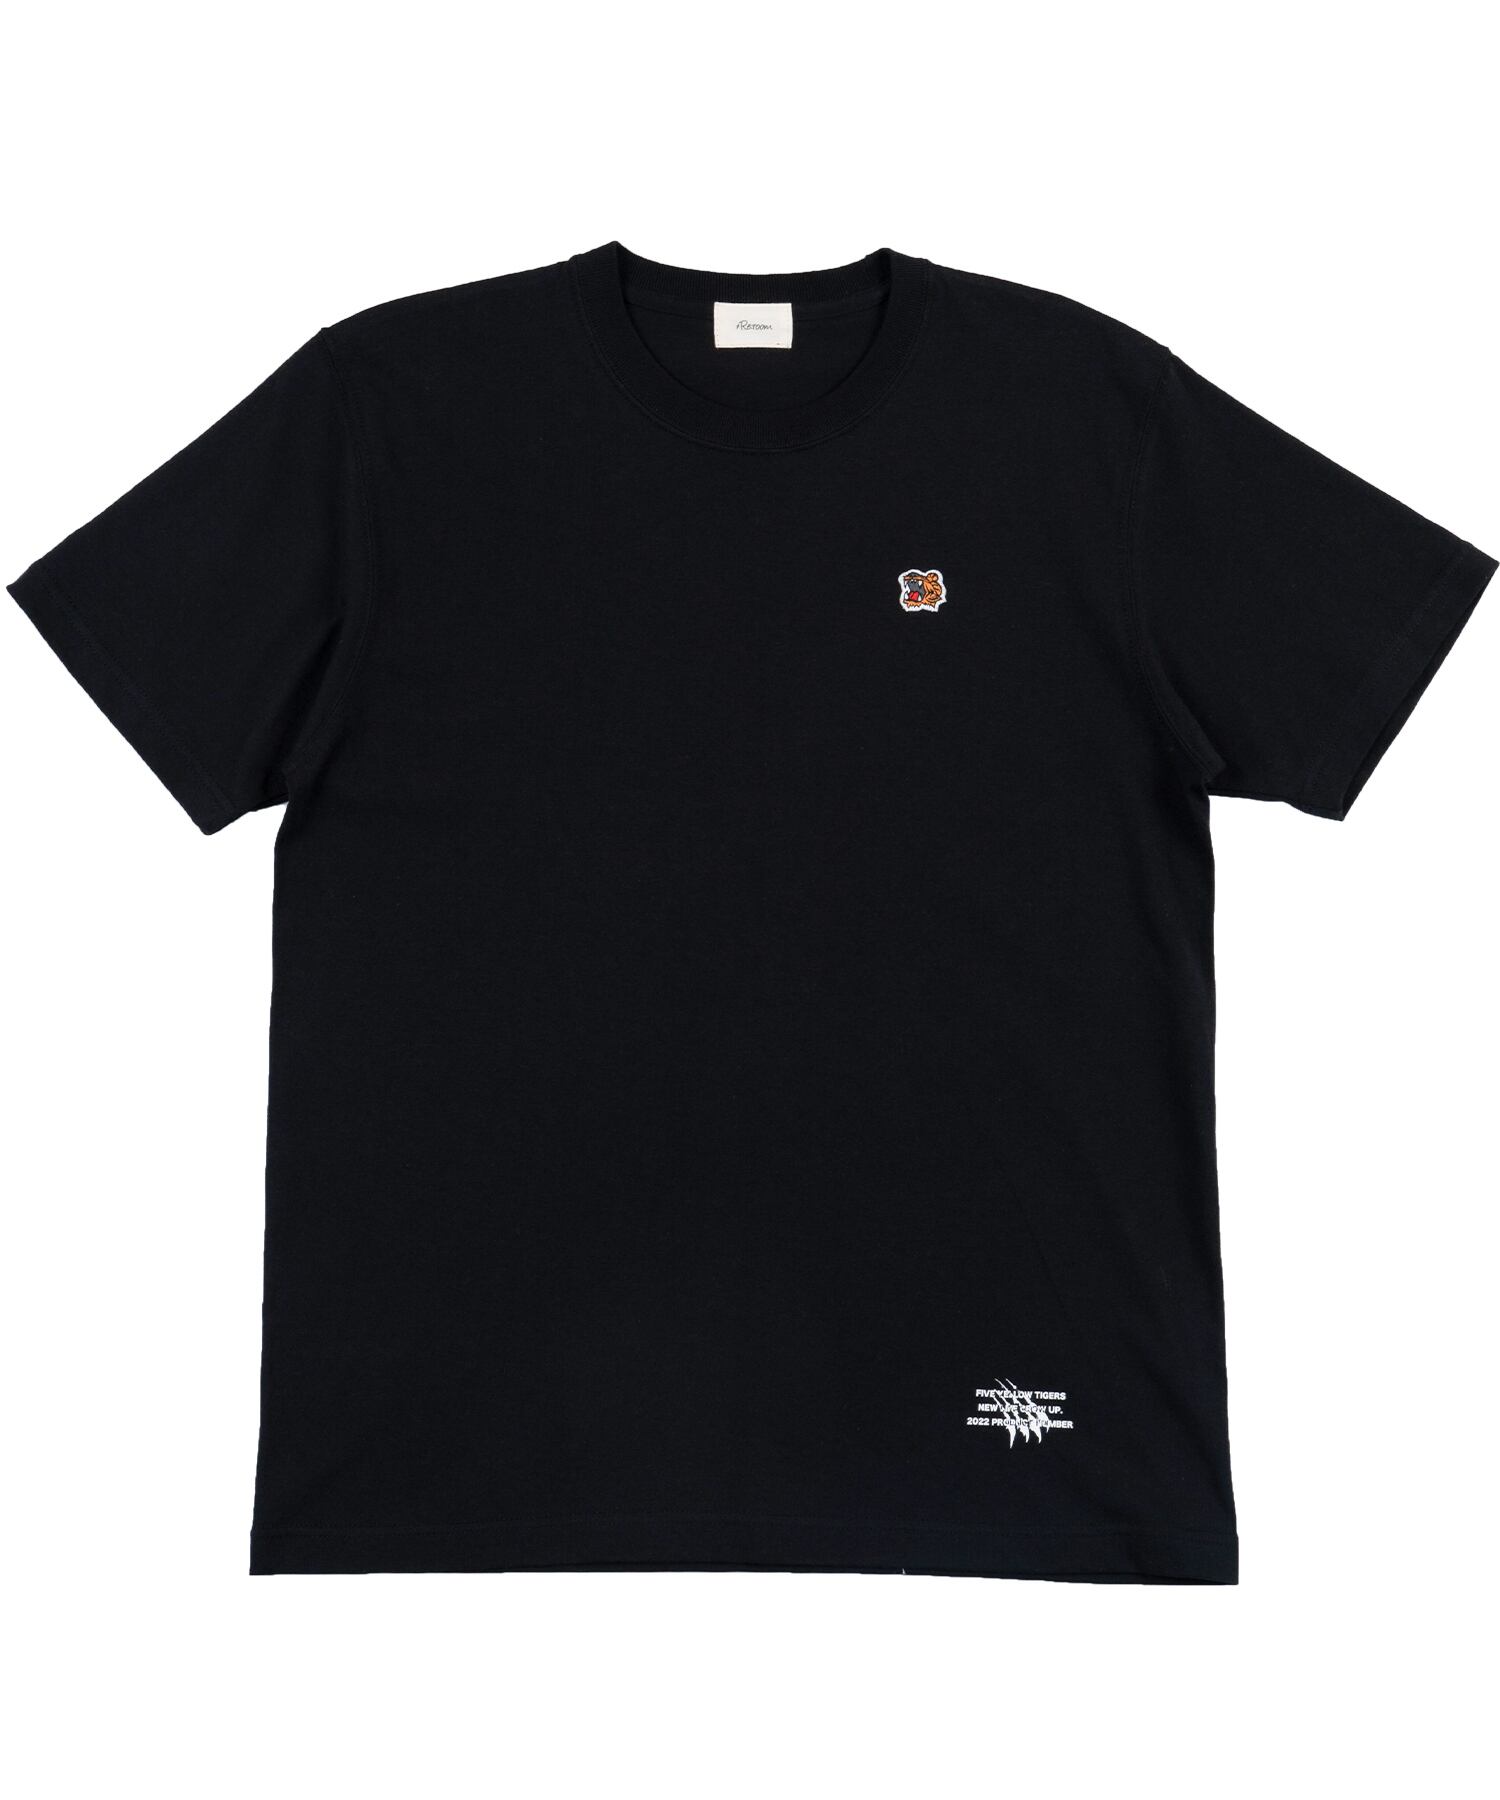 ONE POINT BASIC T-shirts "Tiger"［REC573］